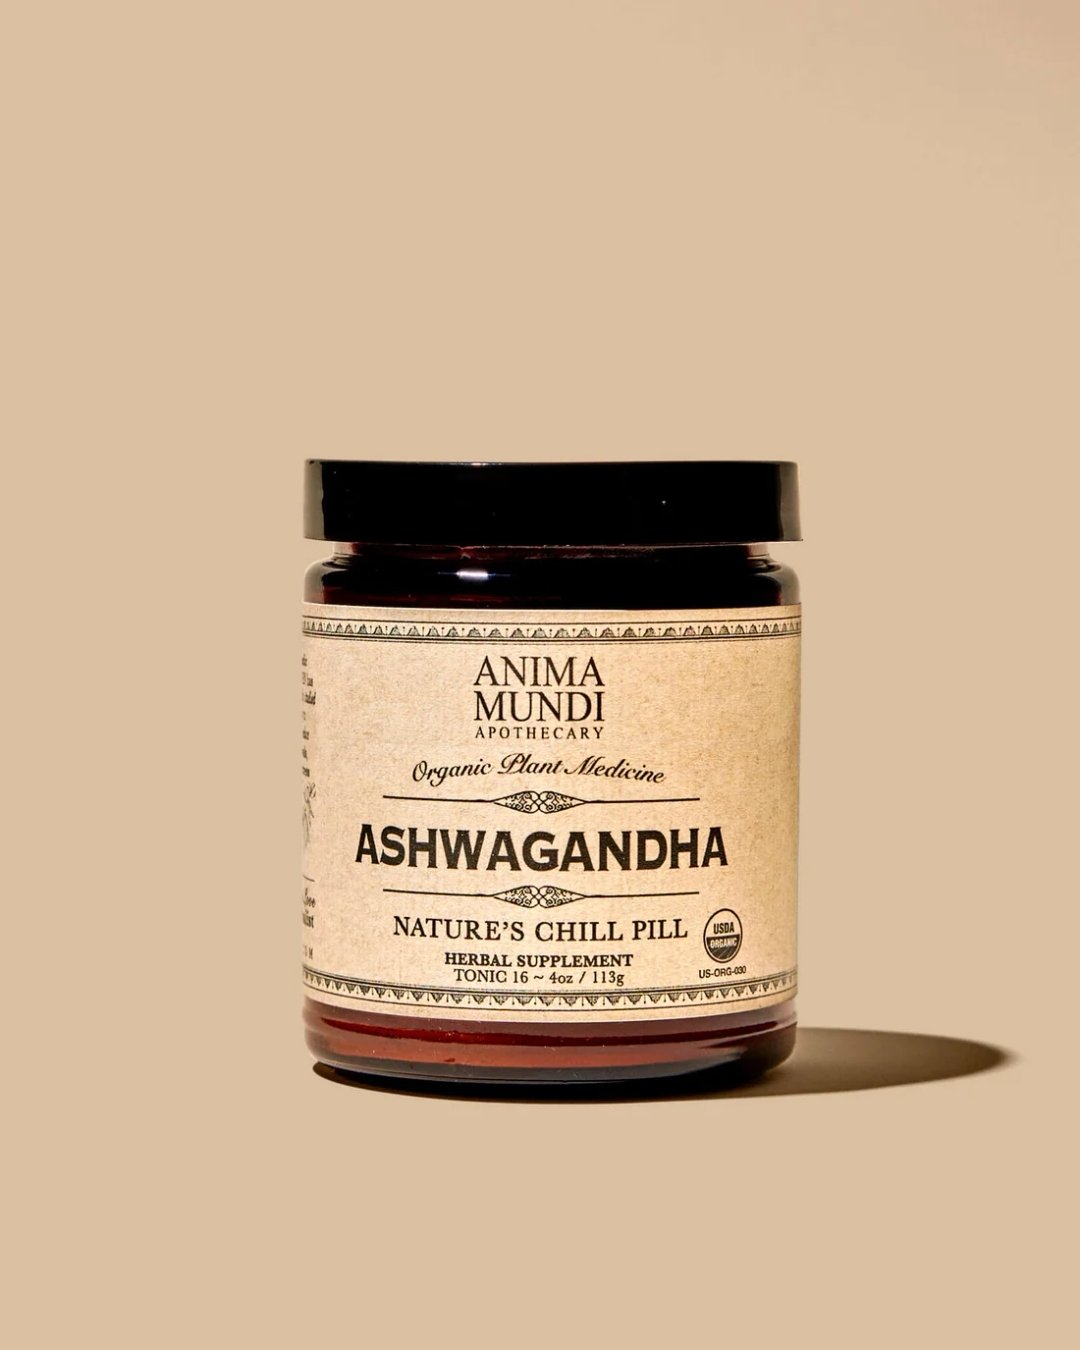 Anima Mundi Ashwagandha is amazing! ​​​​​​​​
​​​​​​​​
&quot;Ashwagandha, one of India's greatest botanical and adaptogenic treasures. Popularly known as Indian Ginseng, it's very well known for its ability to calm, soothe and strengthen the body. ​​​